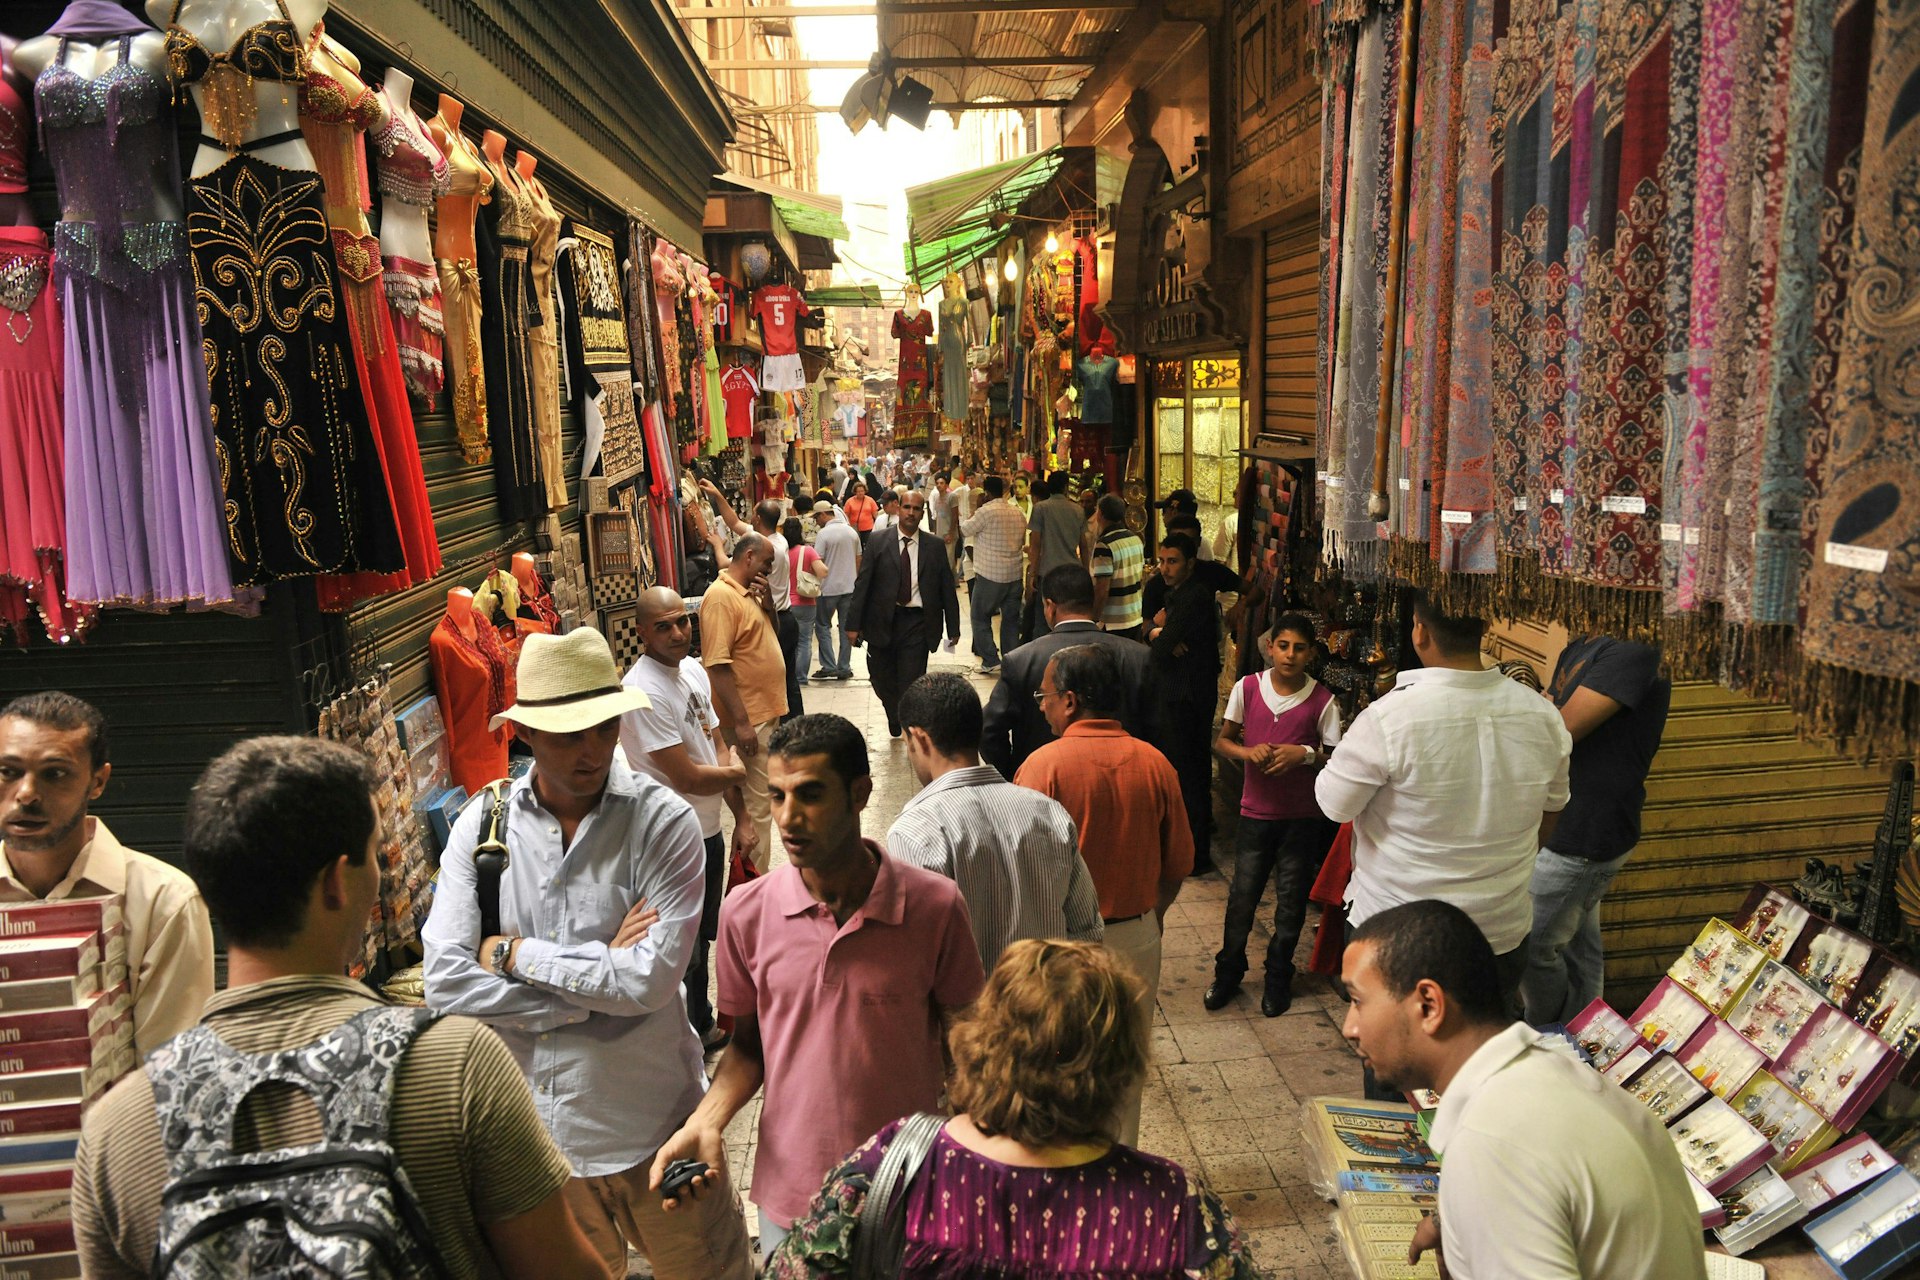 People shopping and trading in the Cairo Souk, which is accesible via train when traveling around Egypt